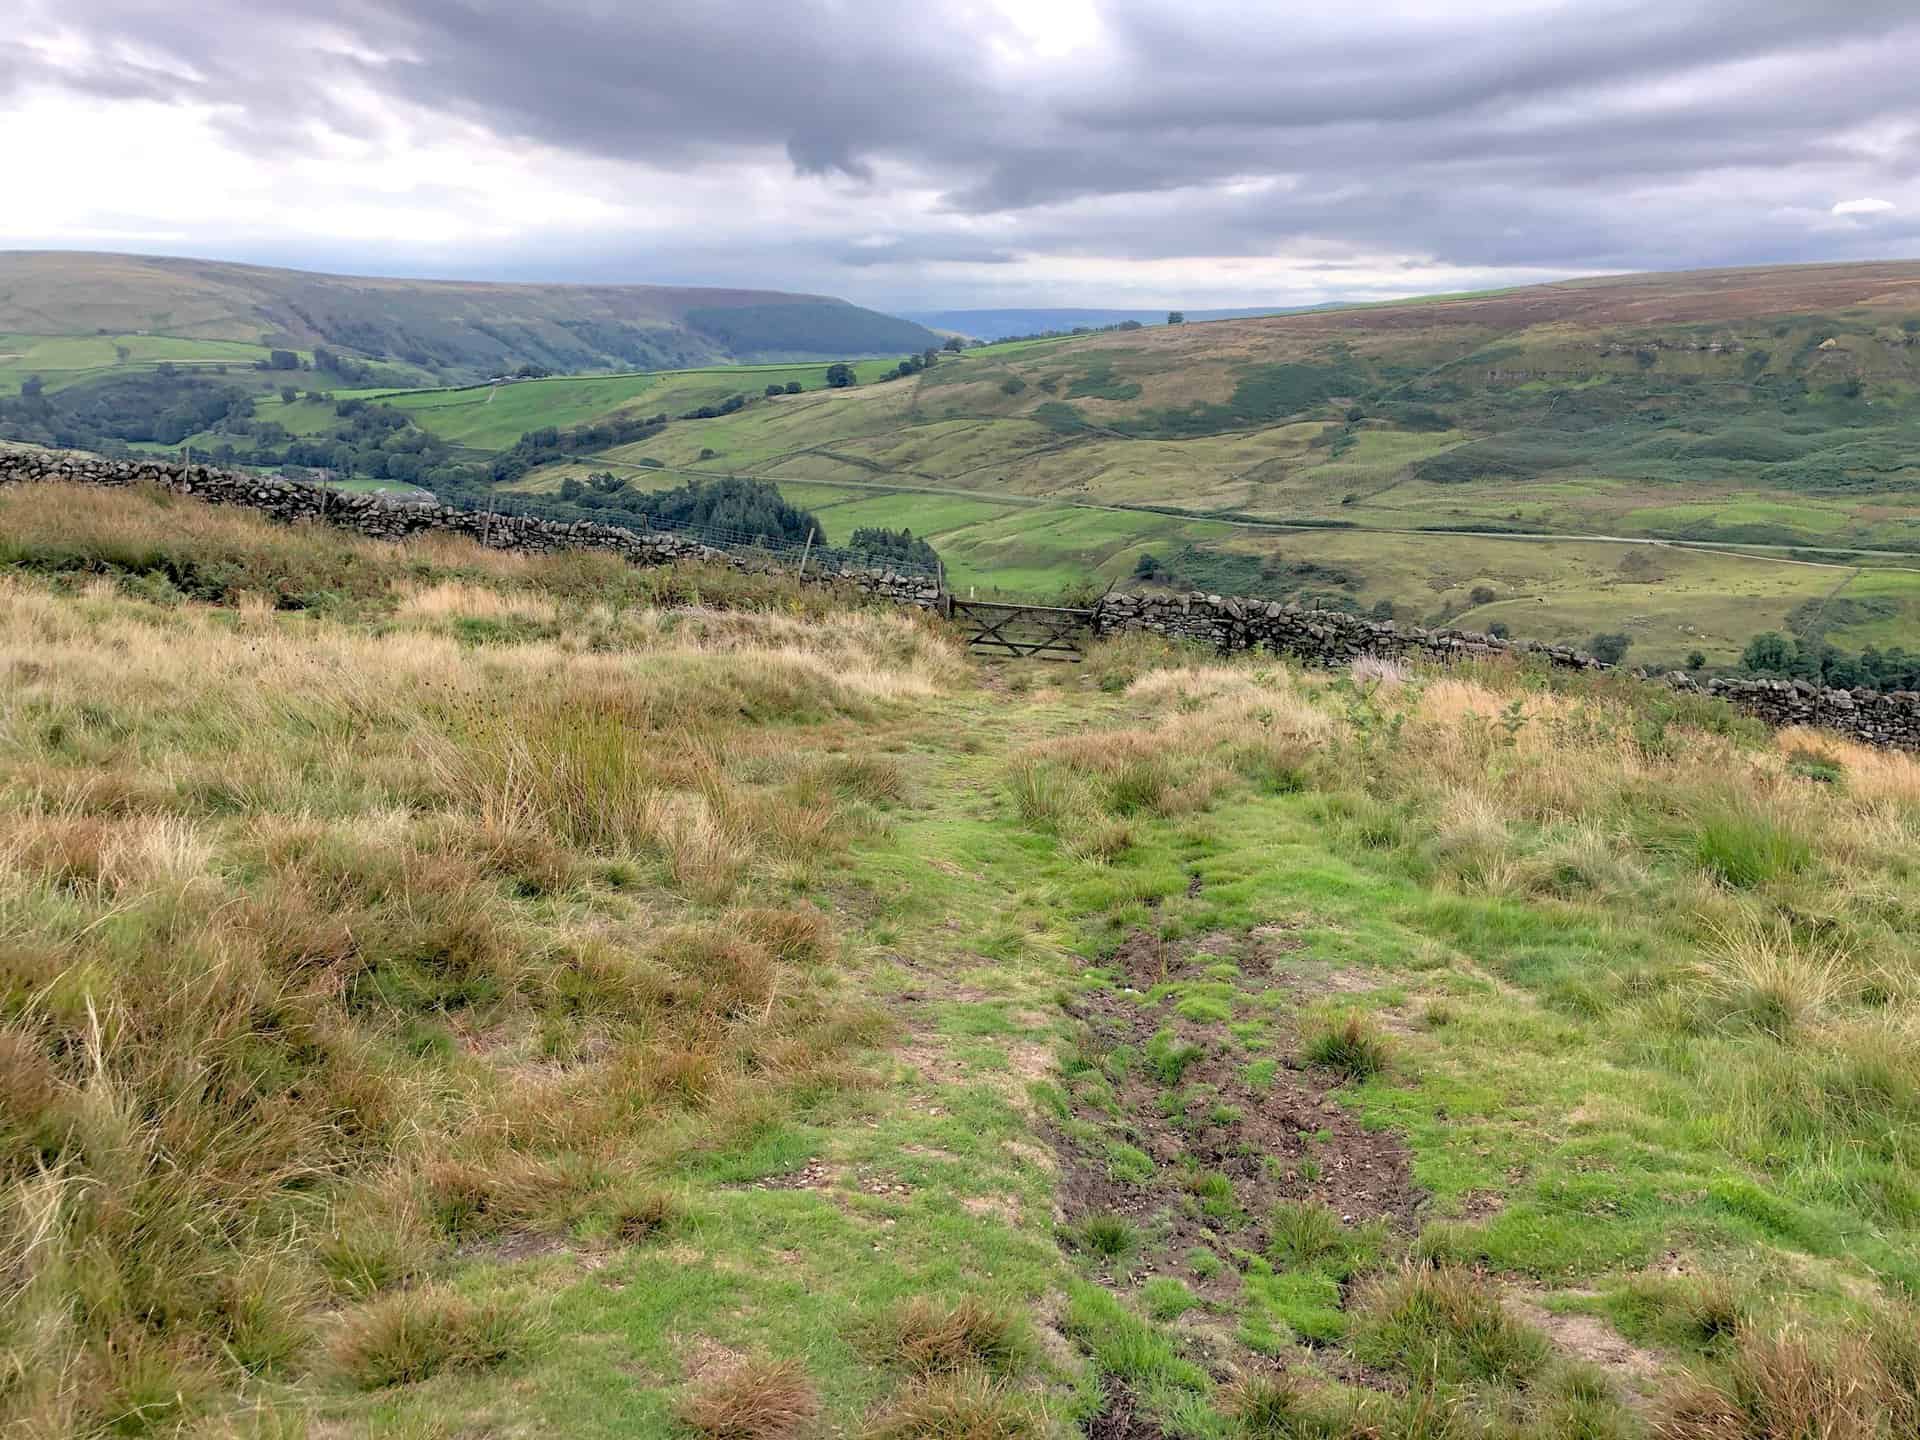 The view south-east over Nidderdale towards Lofthouse Moor (left) and In Moor (right).